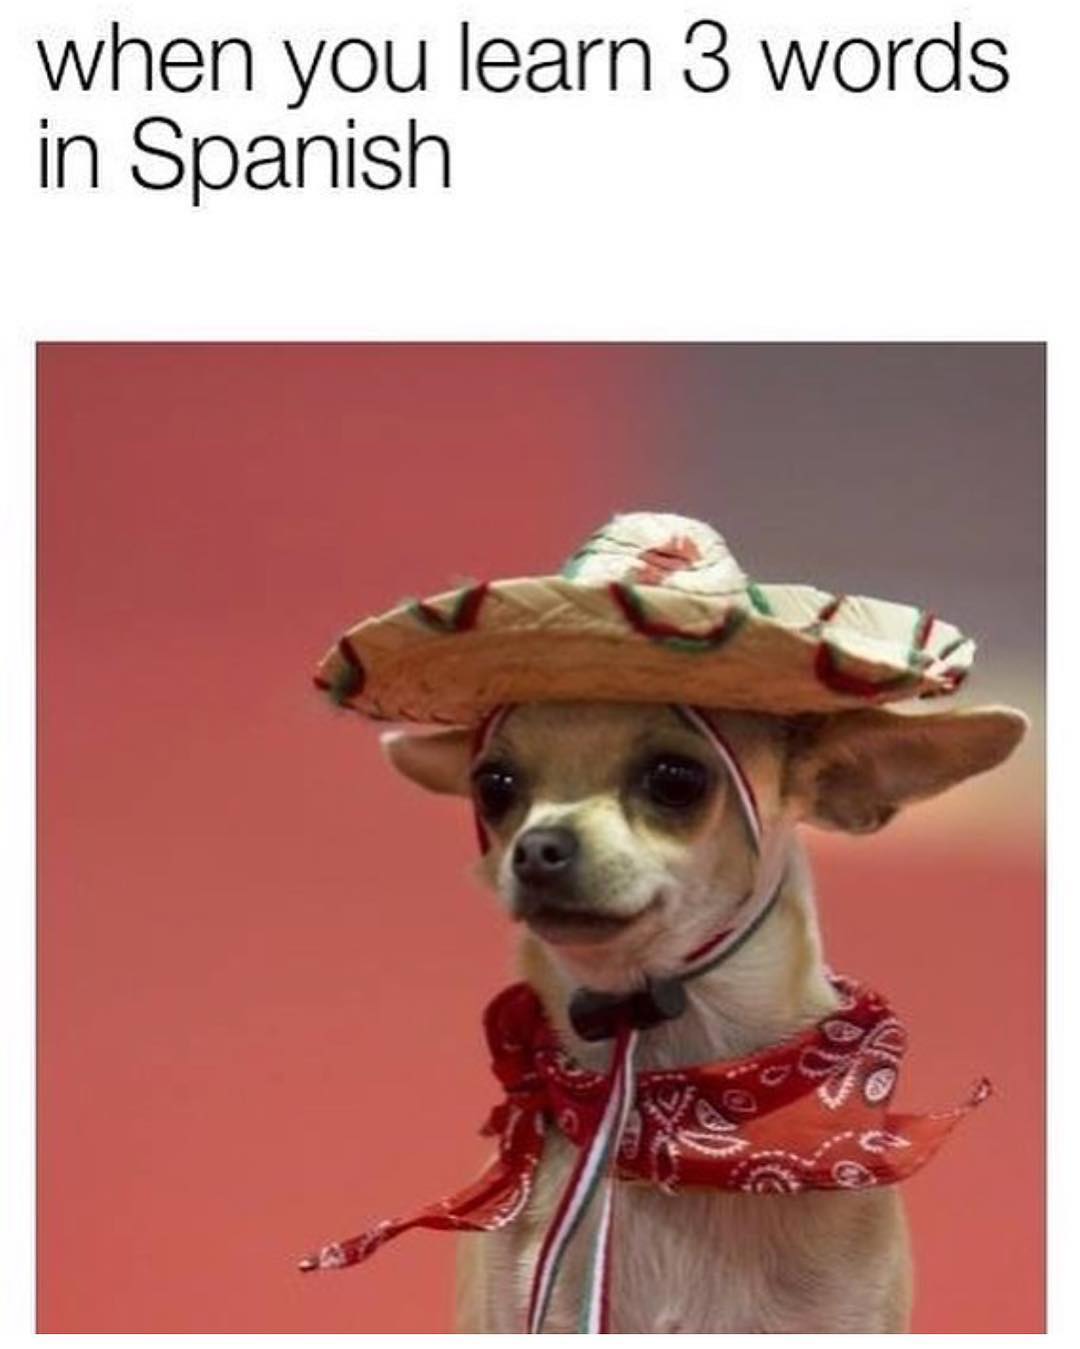 When you learn 3 words in Spanish.